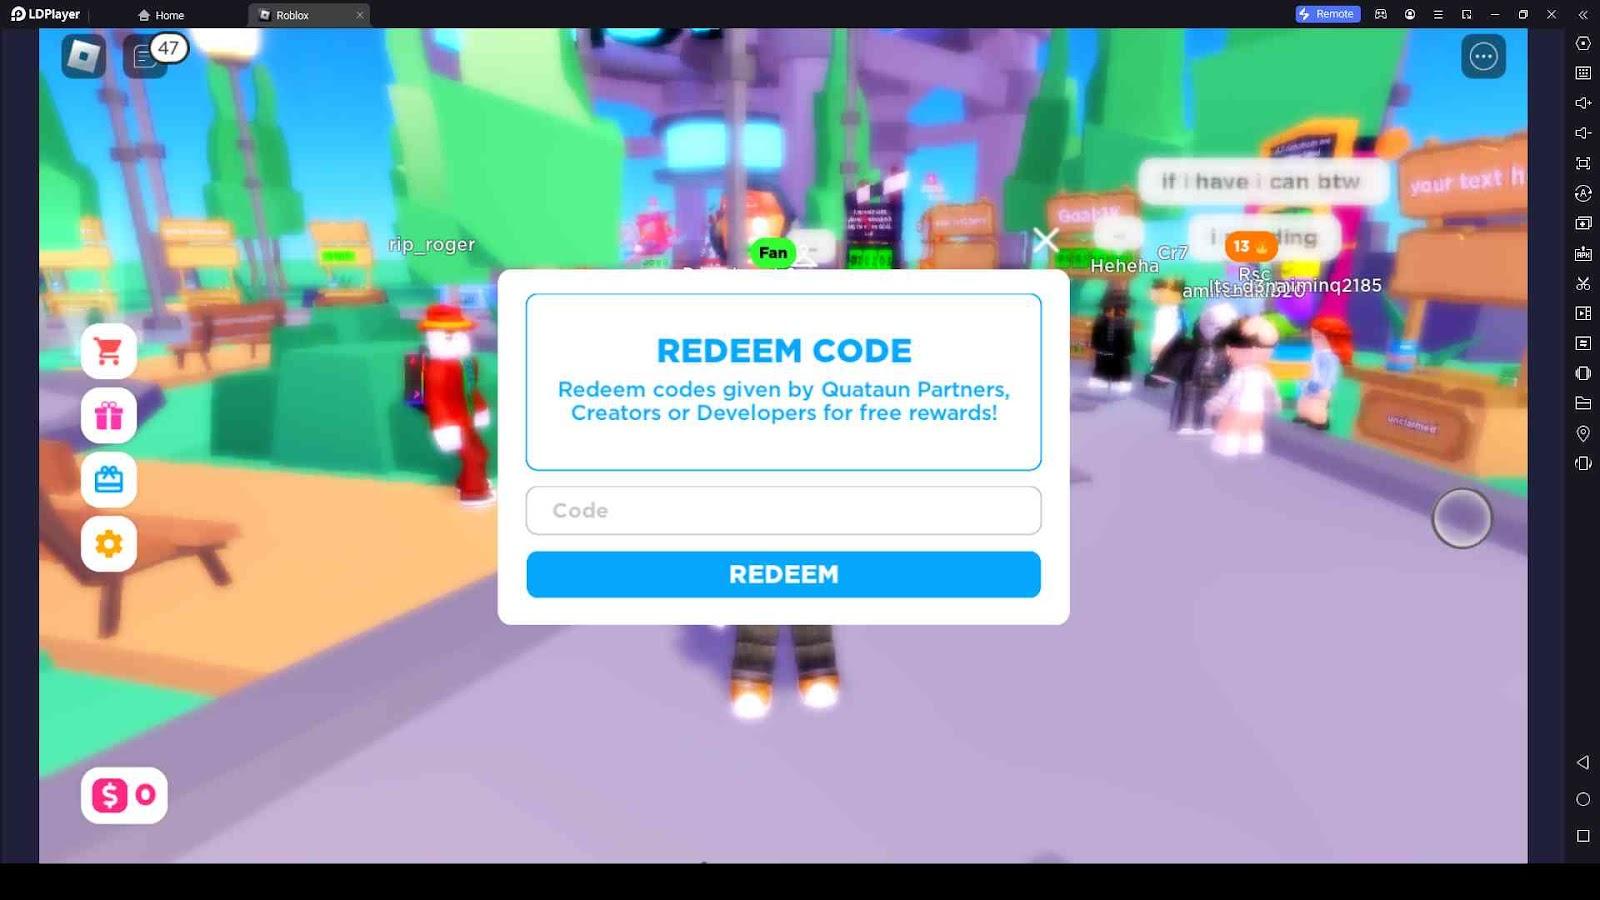 All active PLS DONATE codes to redeem Giftbux & more in December 2023